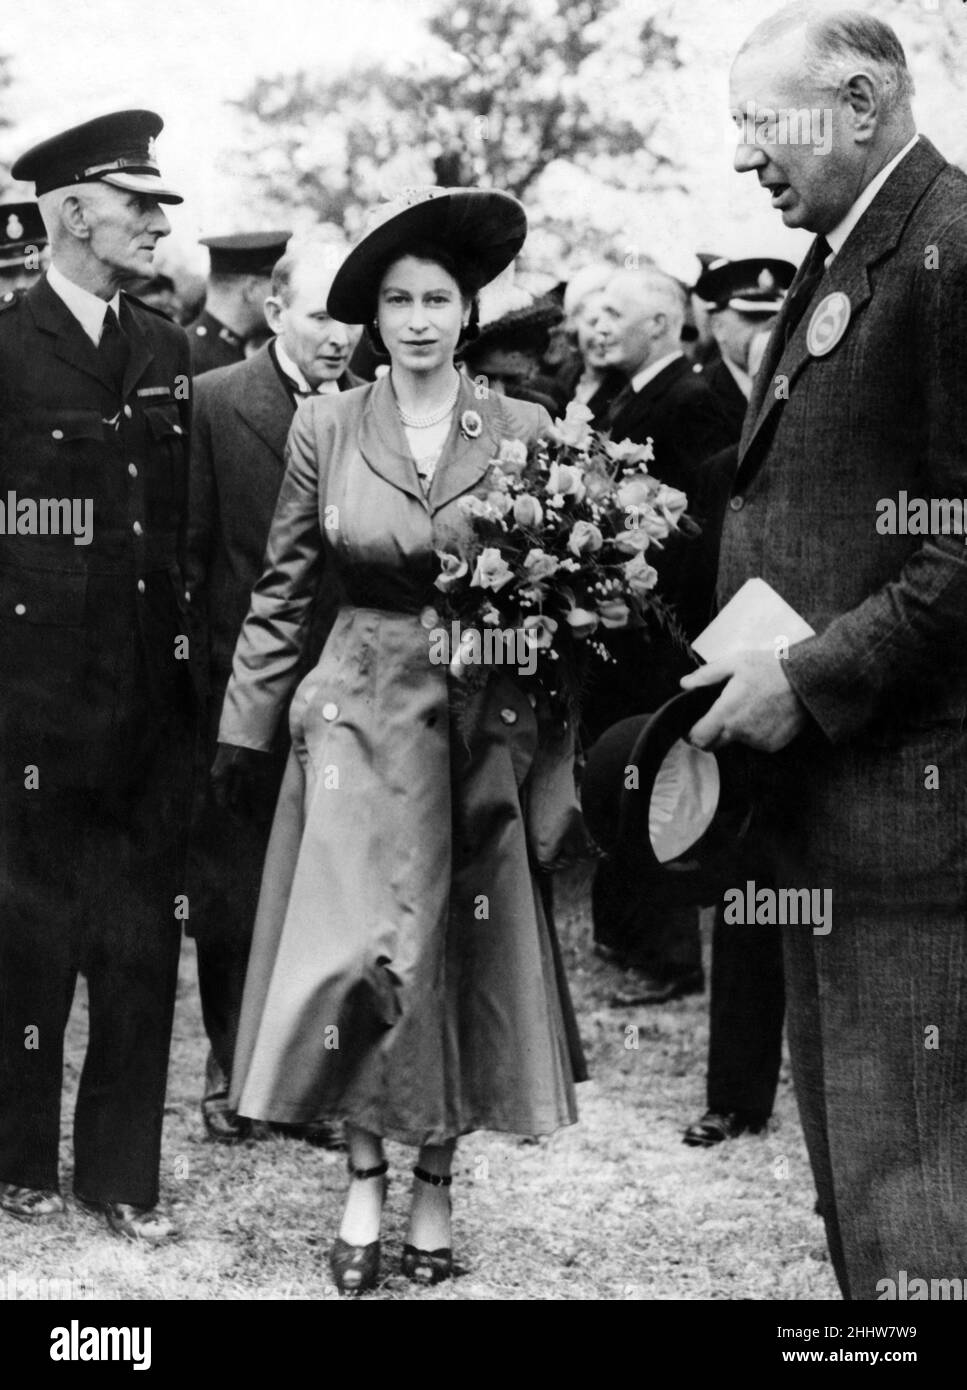 Princess Elizabeth (later Queen Elizabeth II) during a visit to Wales, pictured at the main show ring, greeted by Col H C C Batten (Superintendent of Works). May 1948. Stock Photo